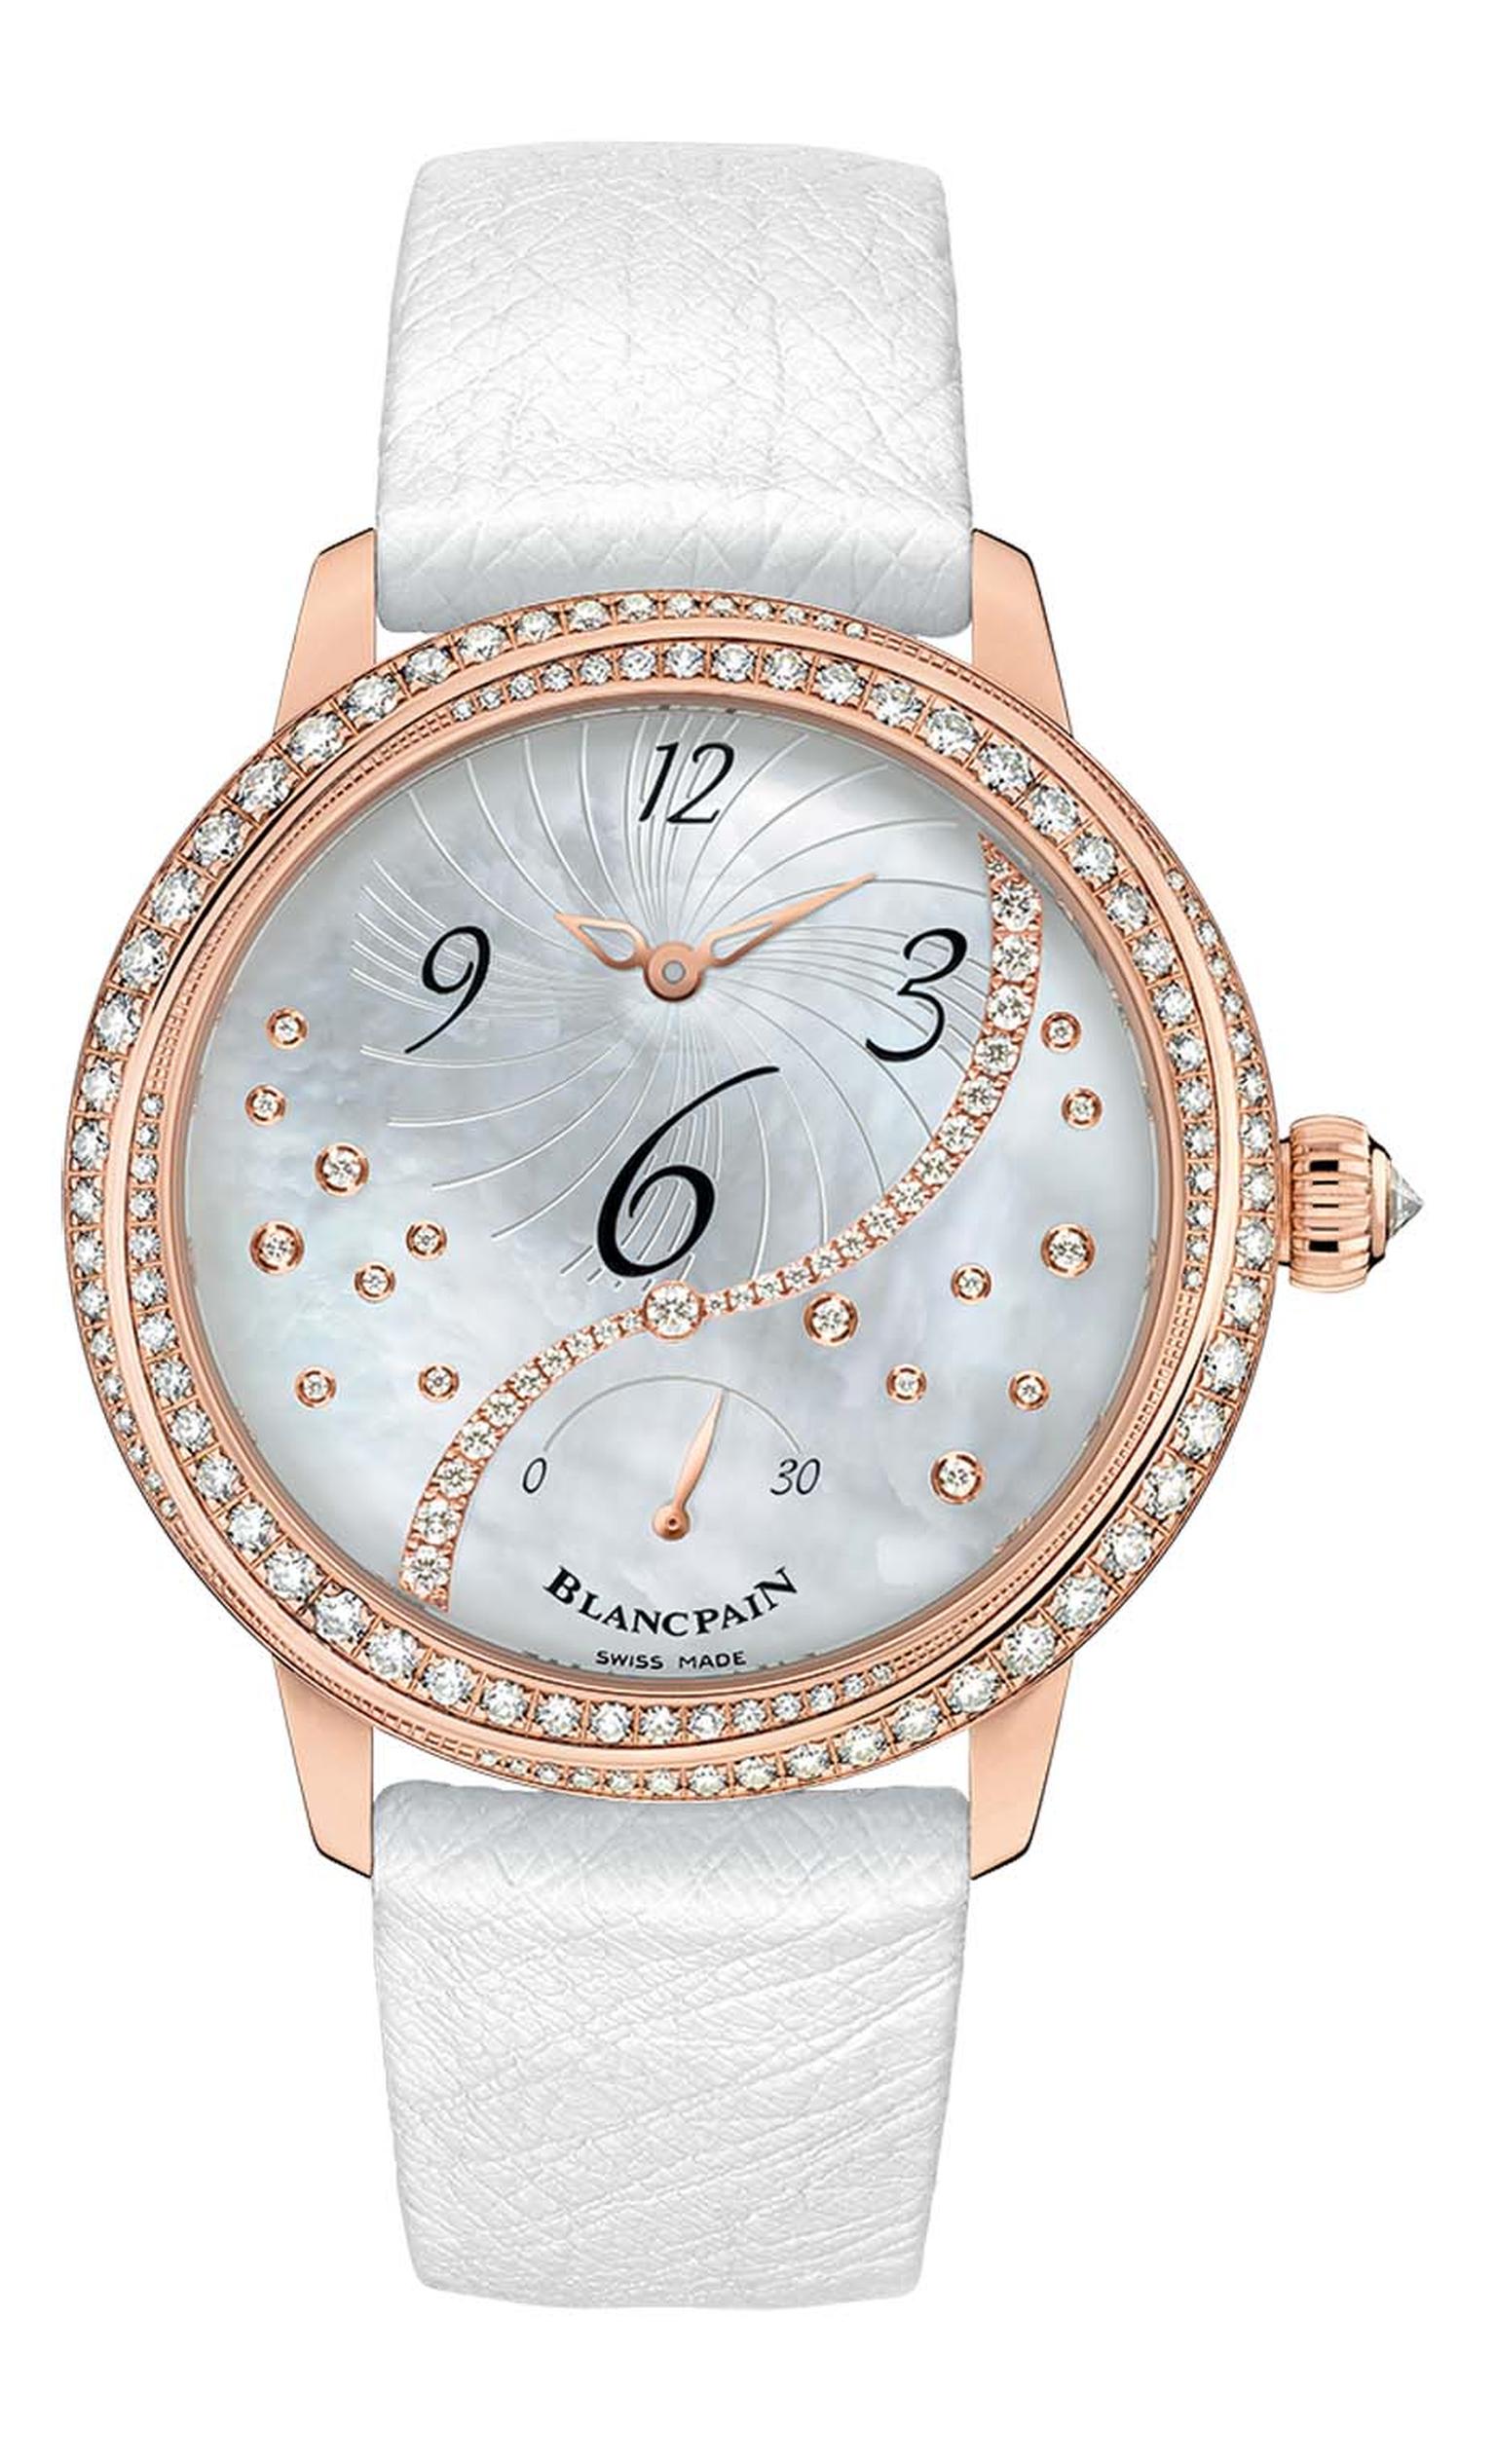 Blancpain Heure Décentrée watch comes in a 36.8mm rose gold case set with 108 diamonds and a dial featuring interwoven ribbons that embrace the contours of the case.